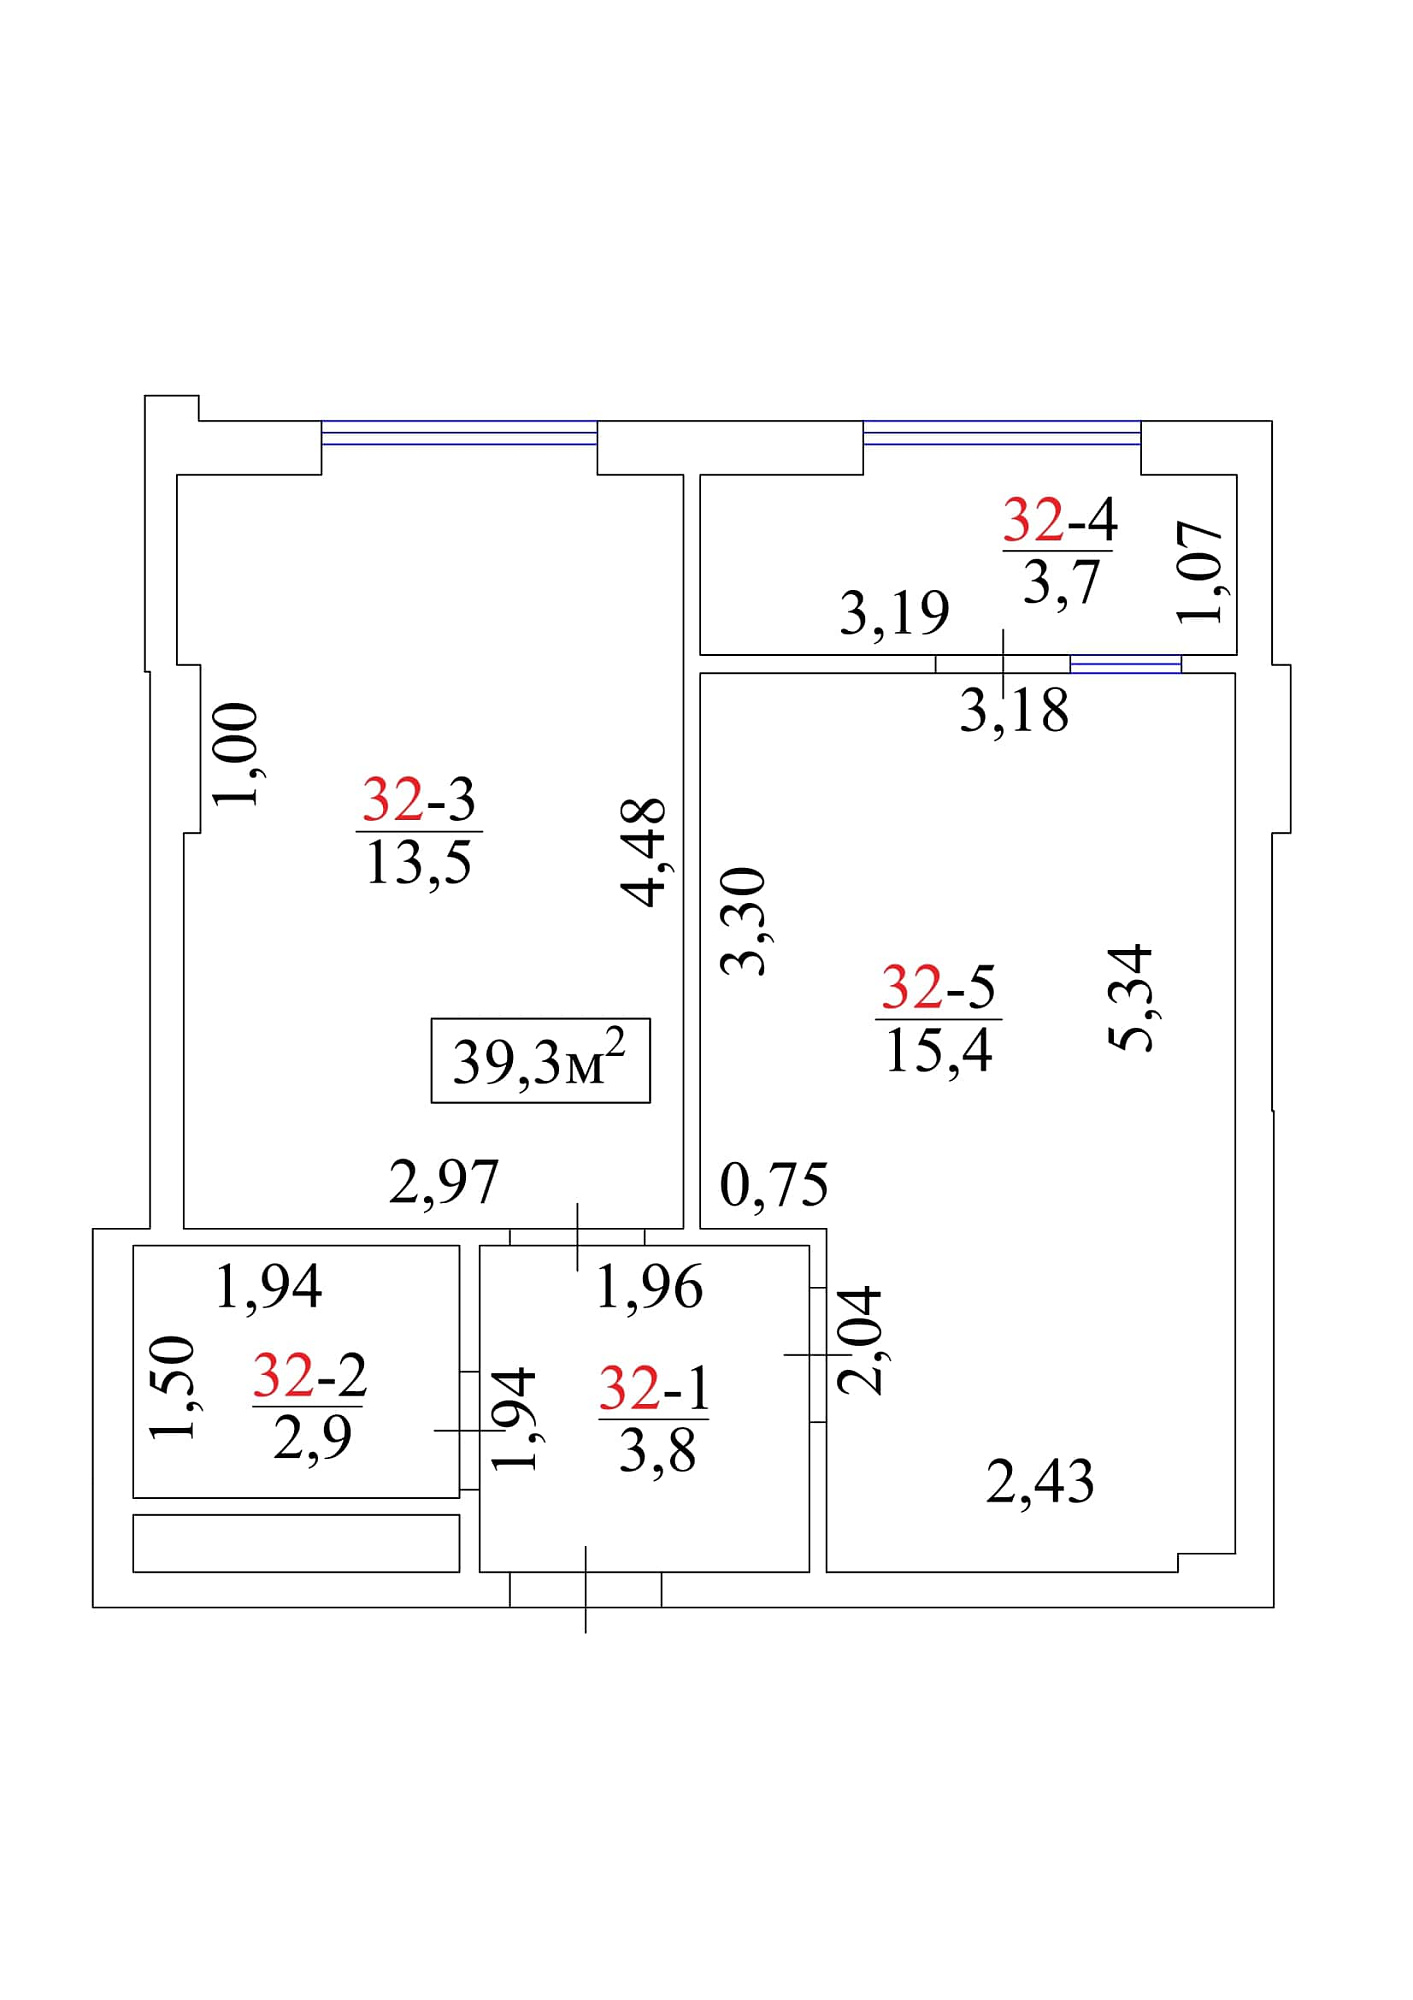 Planning 1-rm flats area 39.3m2, AB-01-04/00032.